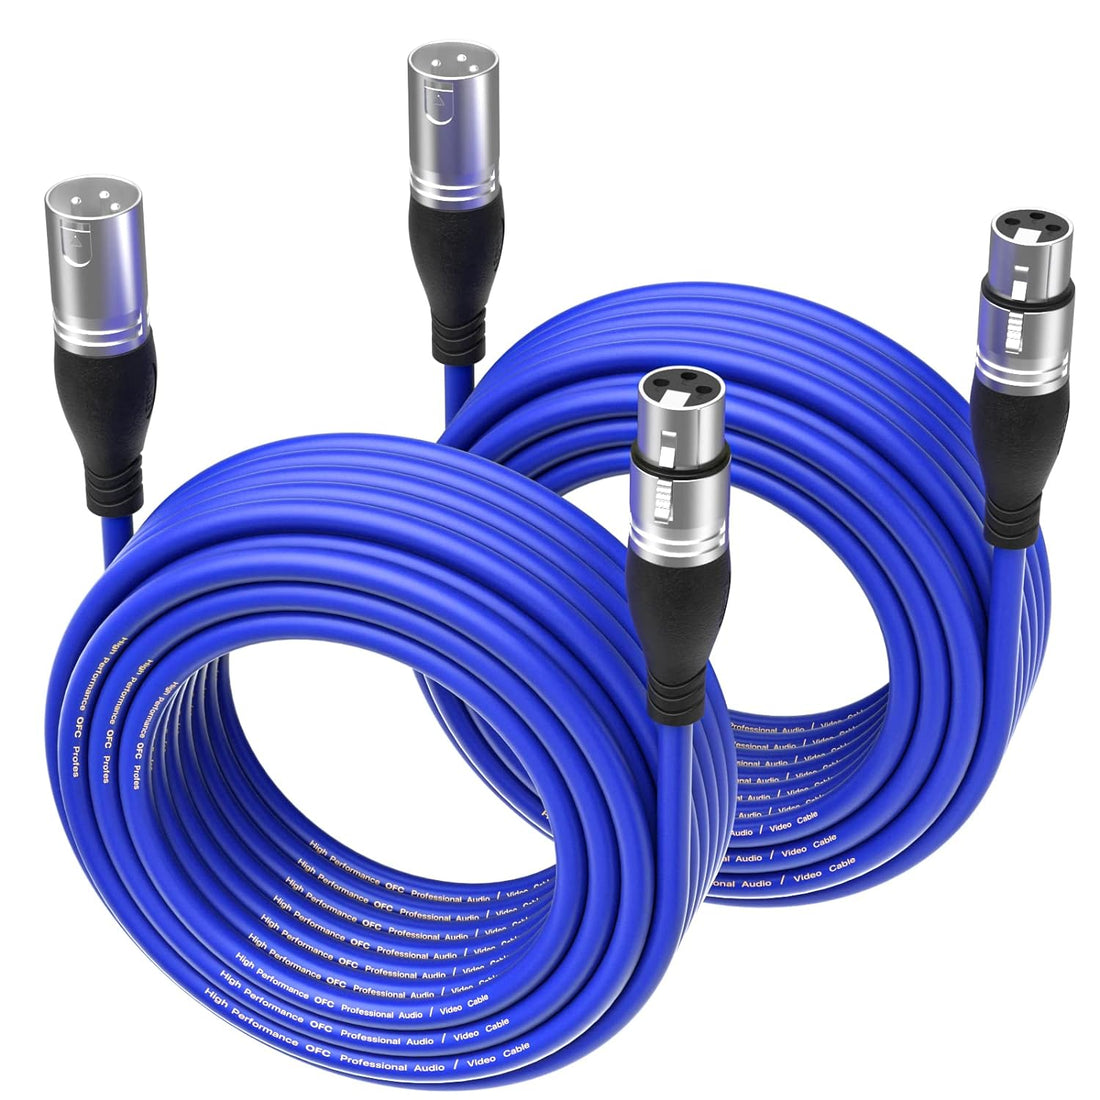 EBXYA XLR Cable 50ft 2 Packs - Premium Balanced DMX Cable with 3-Pin XLR Male to Female Microphone Cable, Blue